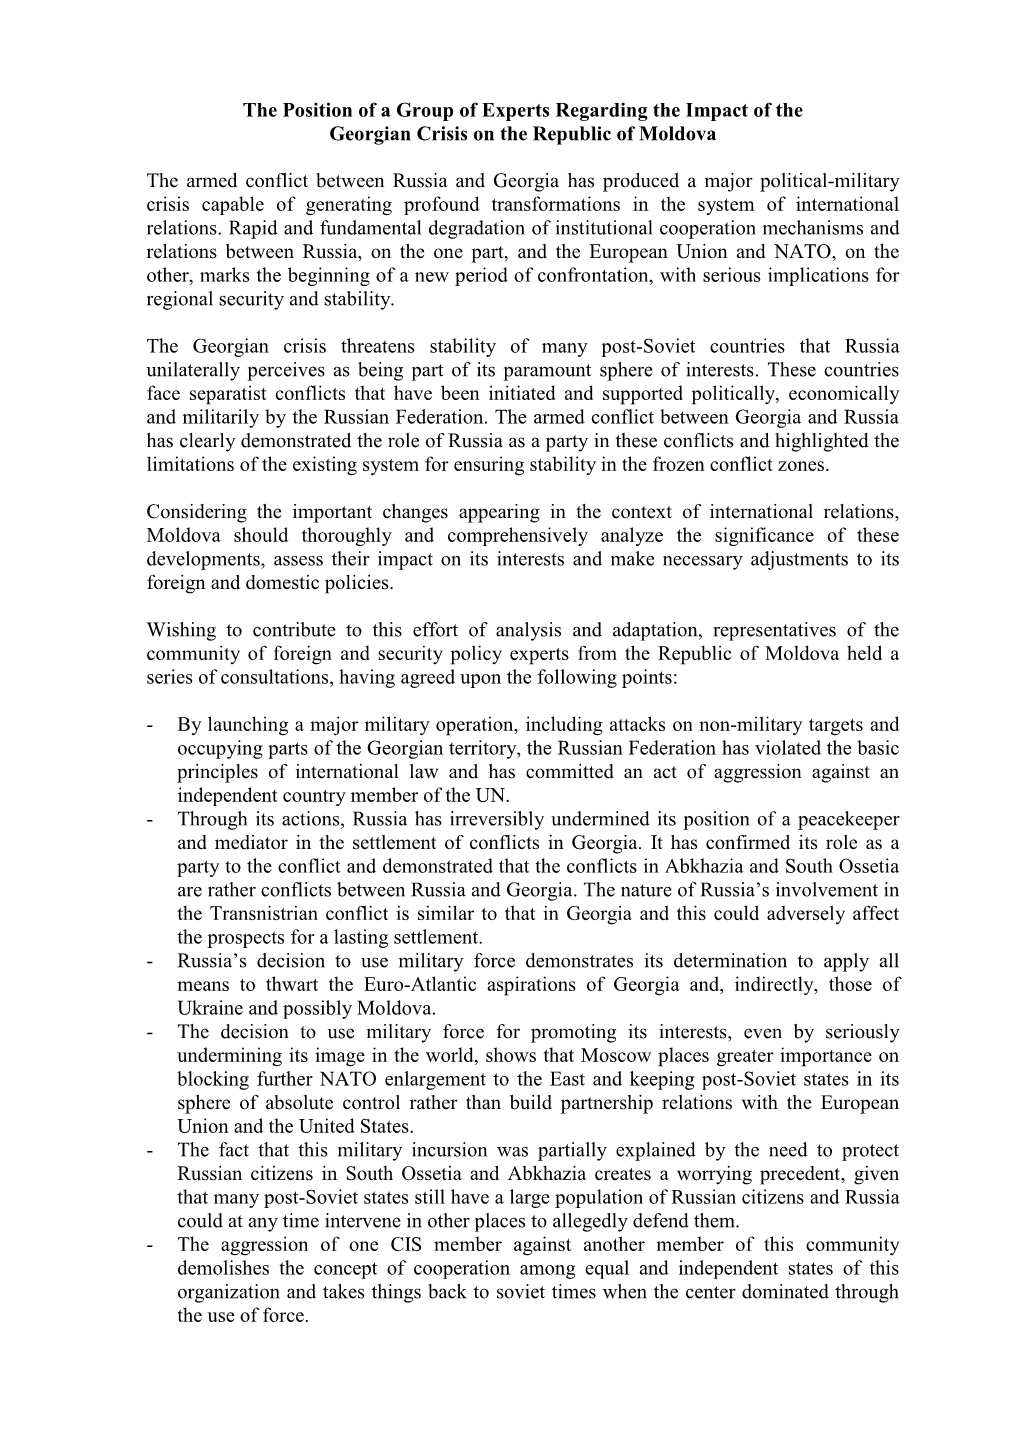 The Position of a Group of Experts Regarding the Impact of the Georgian Crisis on the Republic of Moldova